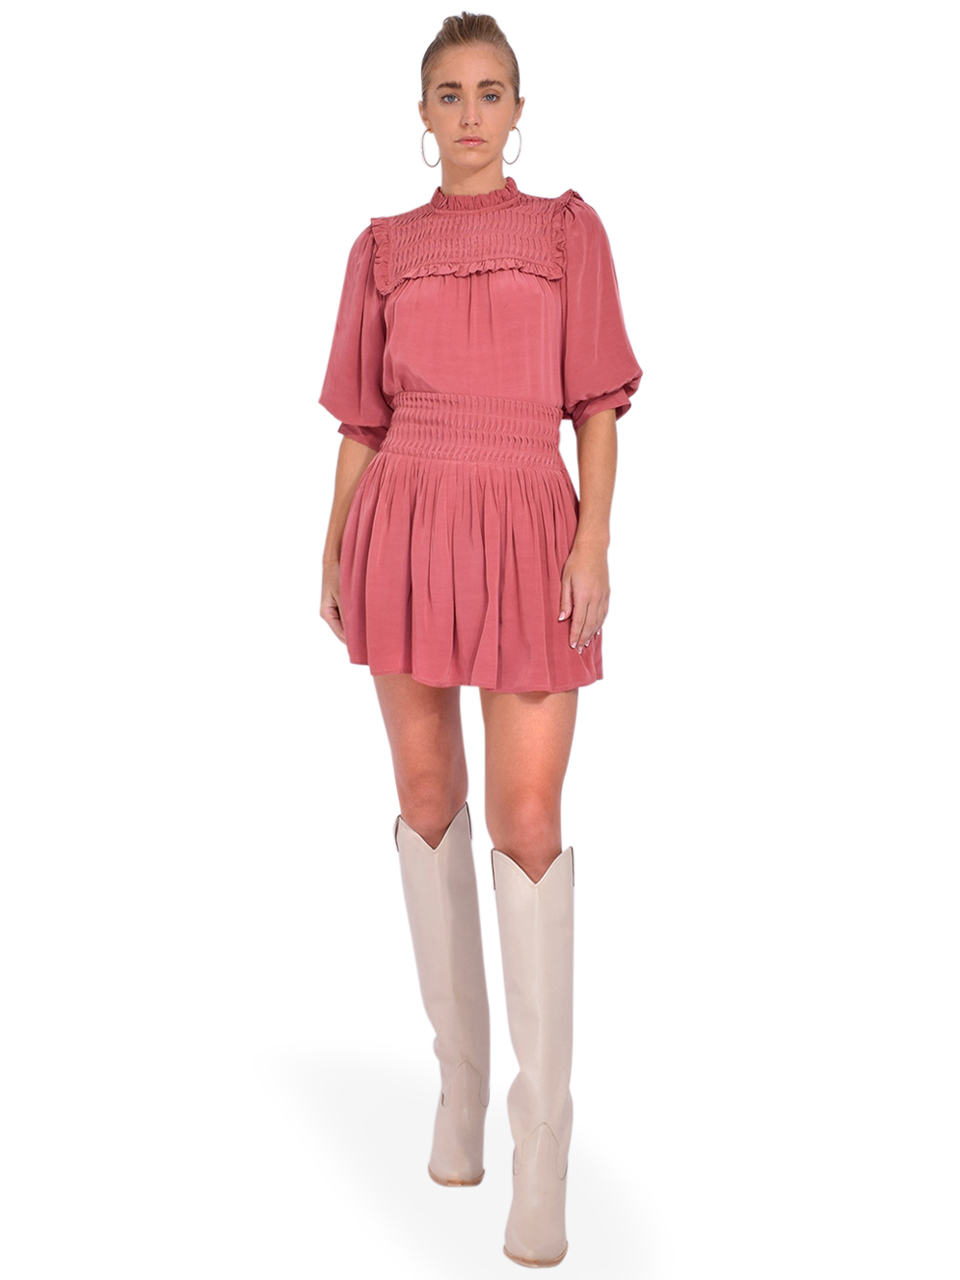 MAGALI PASCAL Cassia Skirt in Dusty Rose Full Outfit 